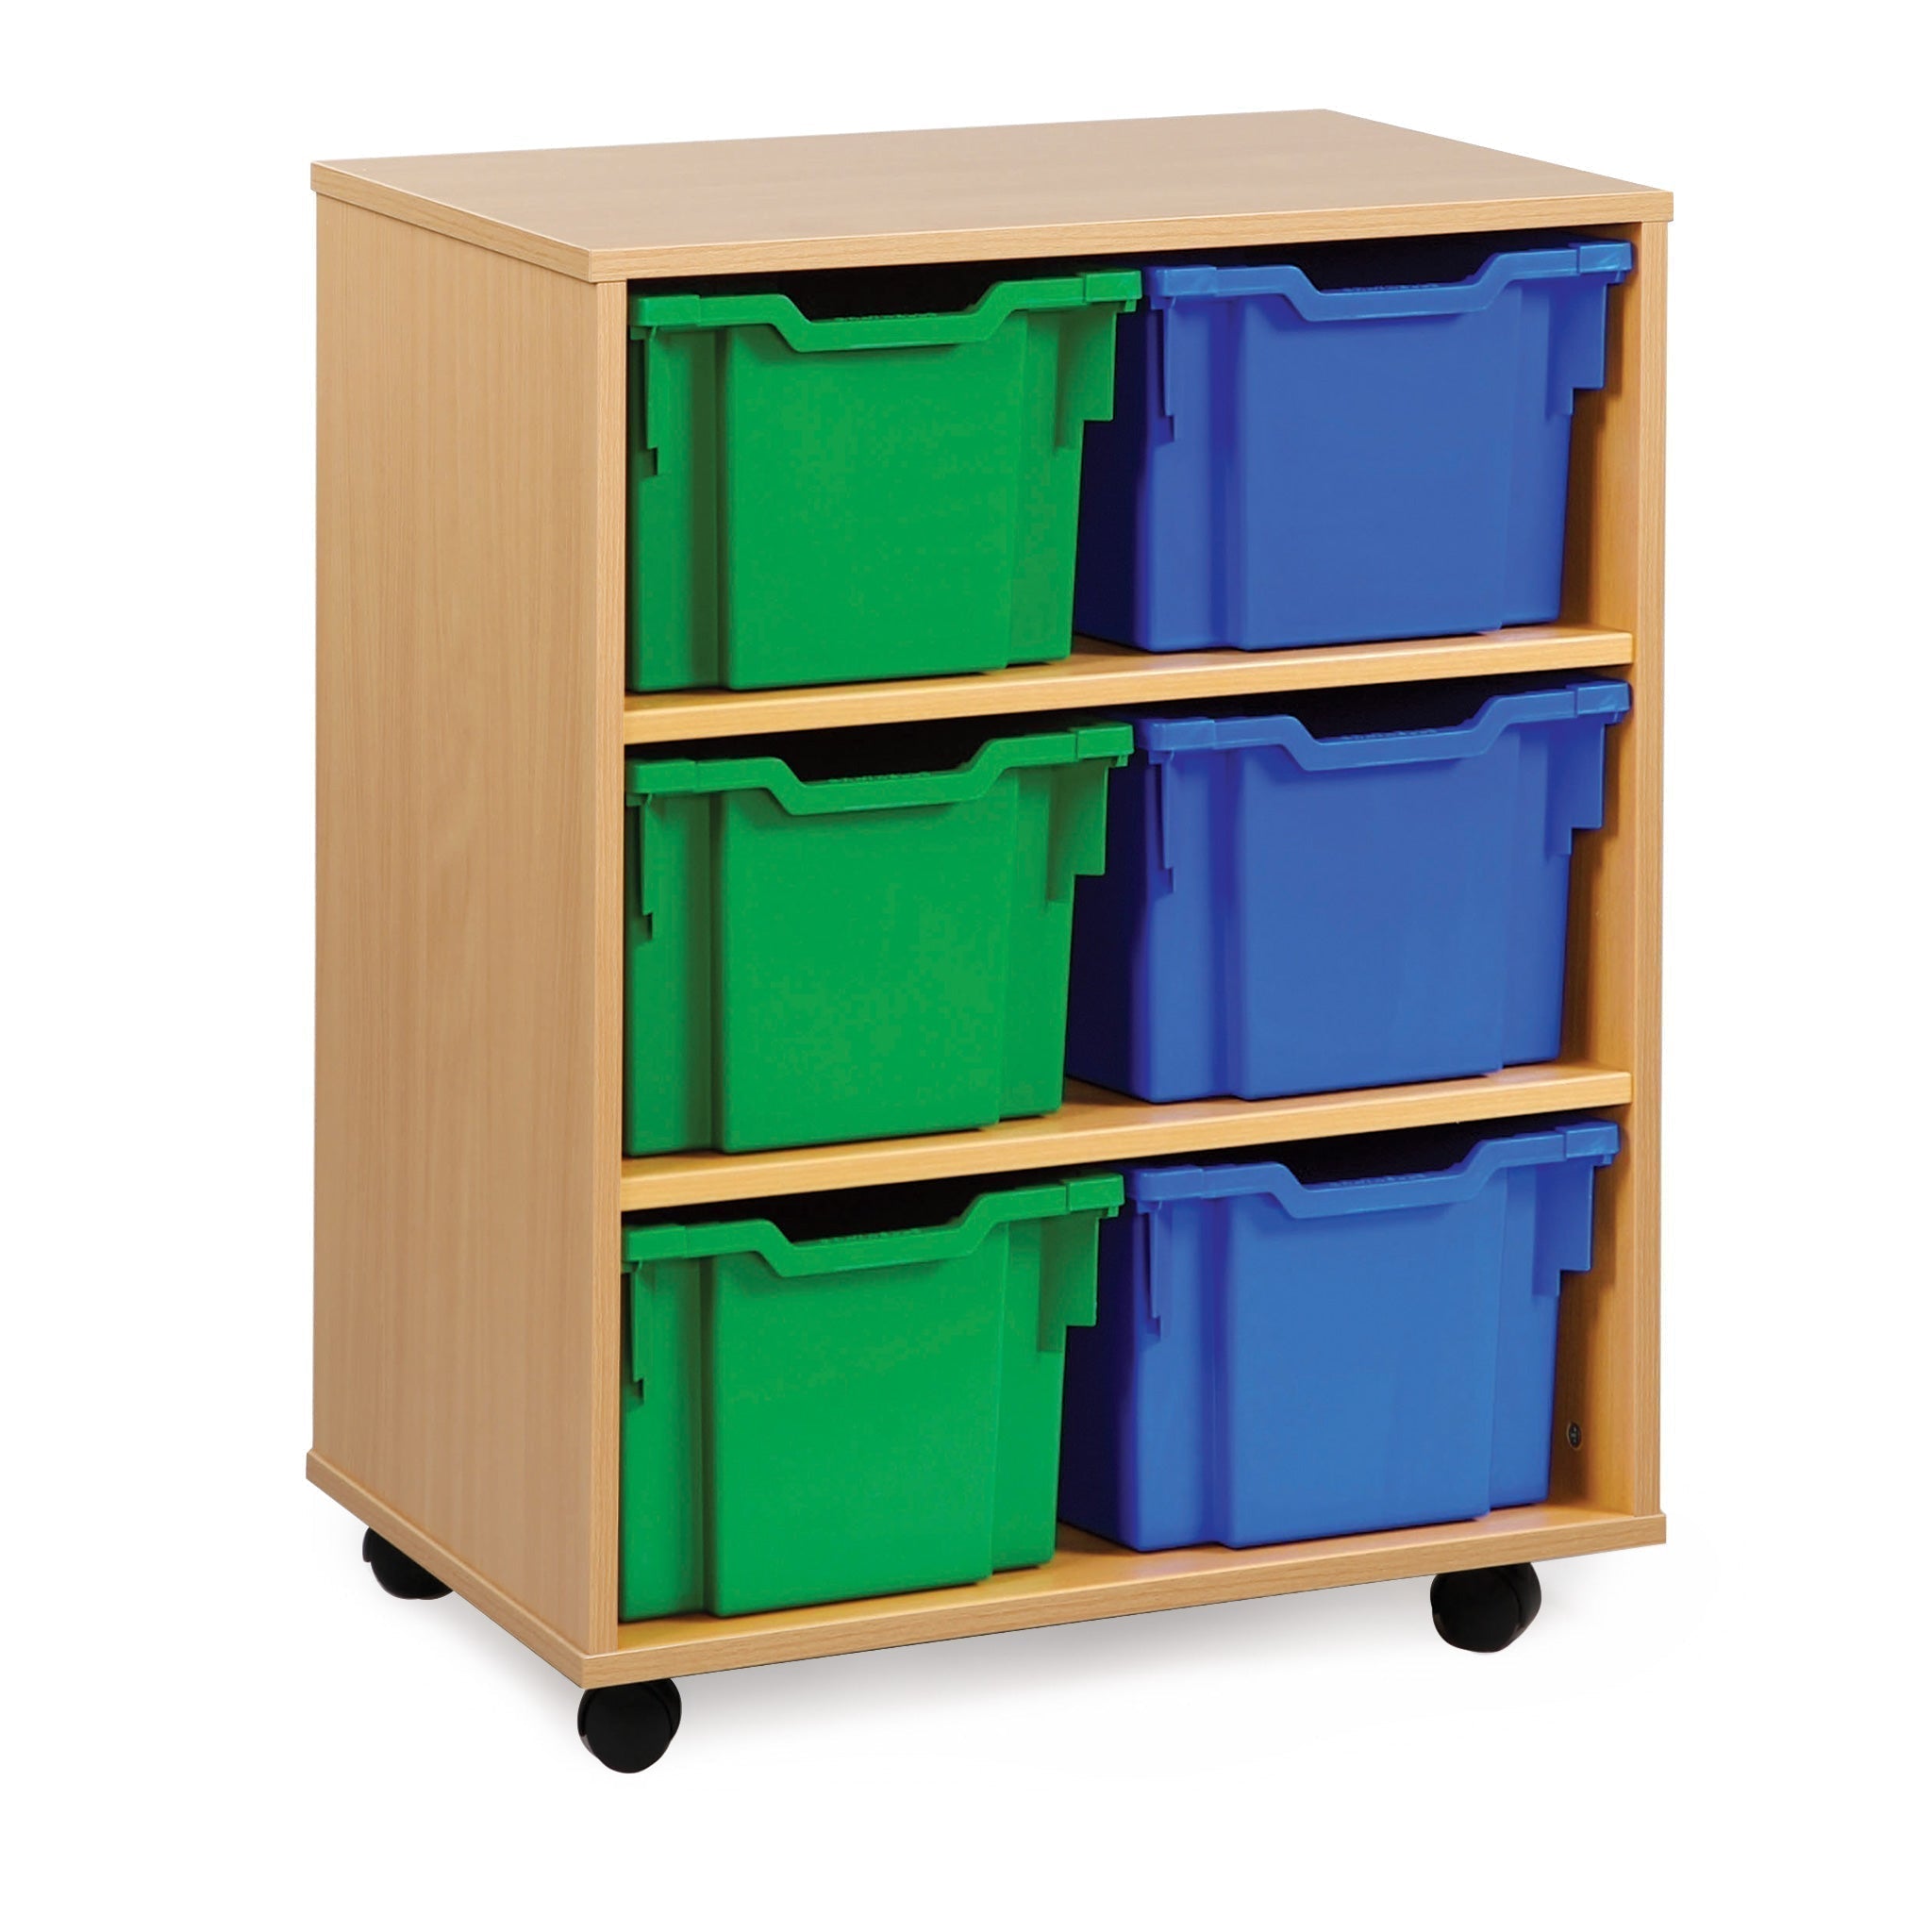 Monarch extra deep tray unit, This Monarch extra deep tray storage unit comes with 6, 12 or 16 extra deep trays to and is complete with castors for easy transportability. In a beech finish and made from sustainably sourced and FSC certified MFC,this unit will be sure to last all the trials of a classroom. Each storage unit is constructed using 18mm Egger MFC and fitted together by cam and dowel construction for extra rigidity and assured quality. These Monarch shallow tray units are supplied with strong non